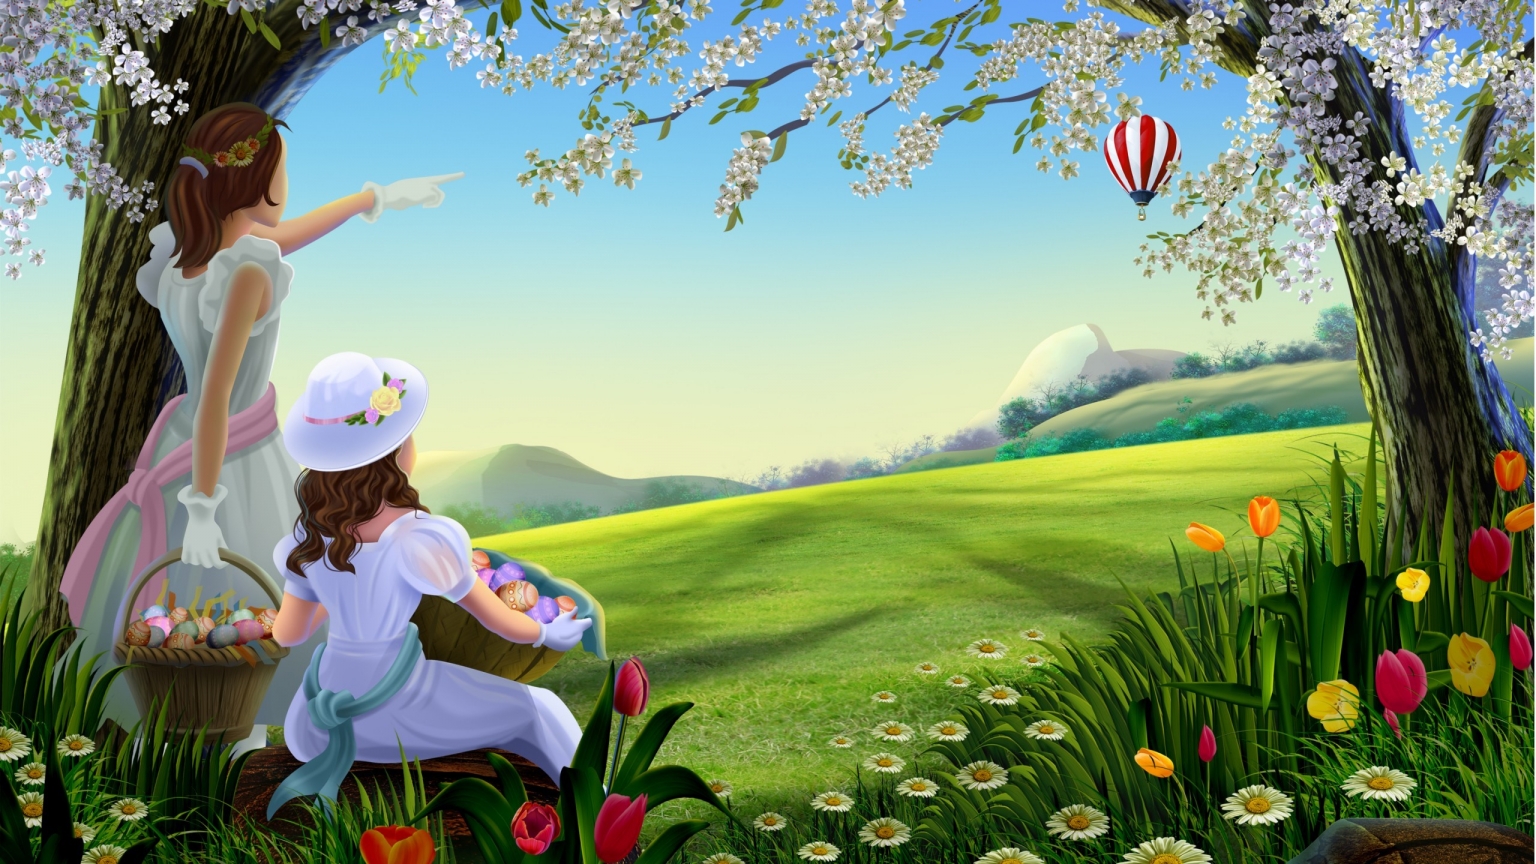 Amazing Spring Painting for 1536 x 864 HDTV resolution